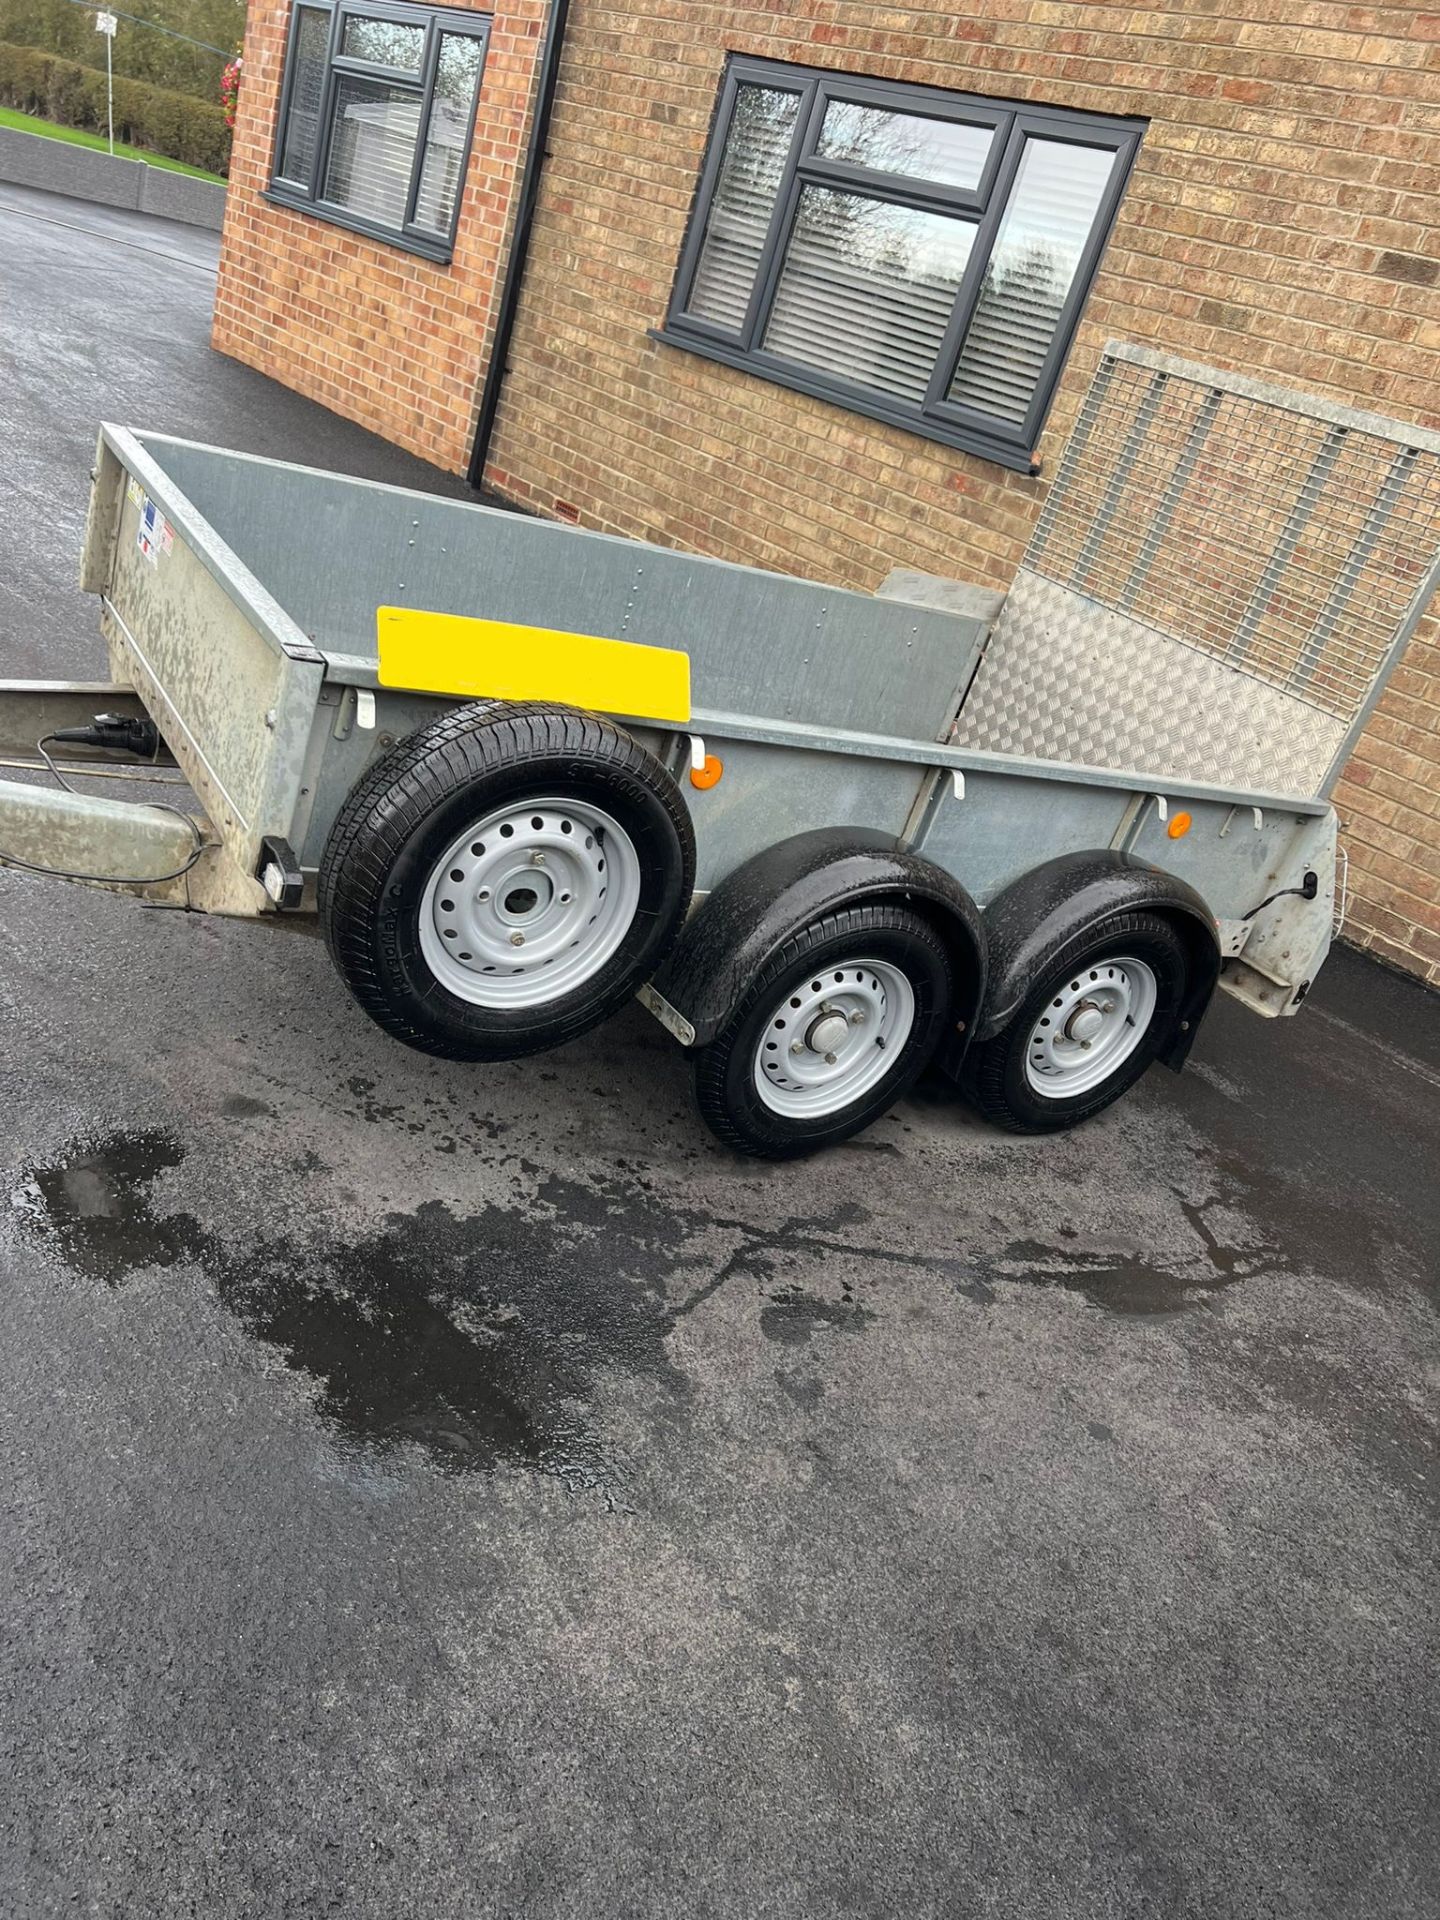 Ifor Williams GD84 Trailer - Year 2018 - Drop down ramp - good tyres all around - Image 3 of 10